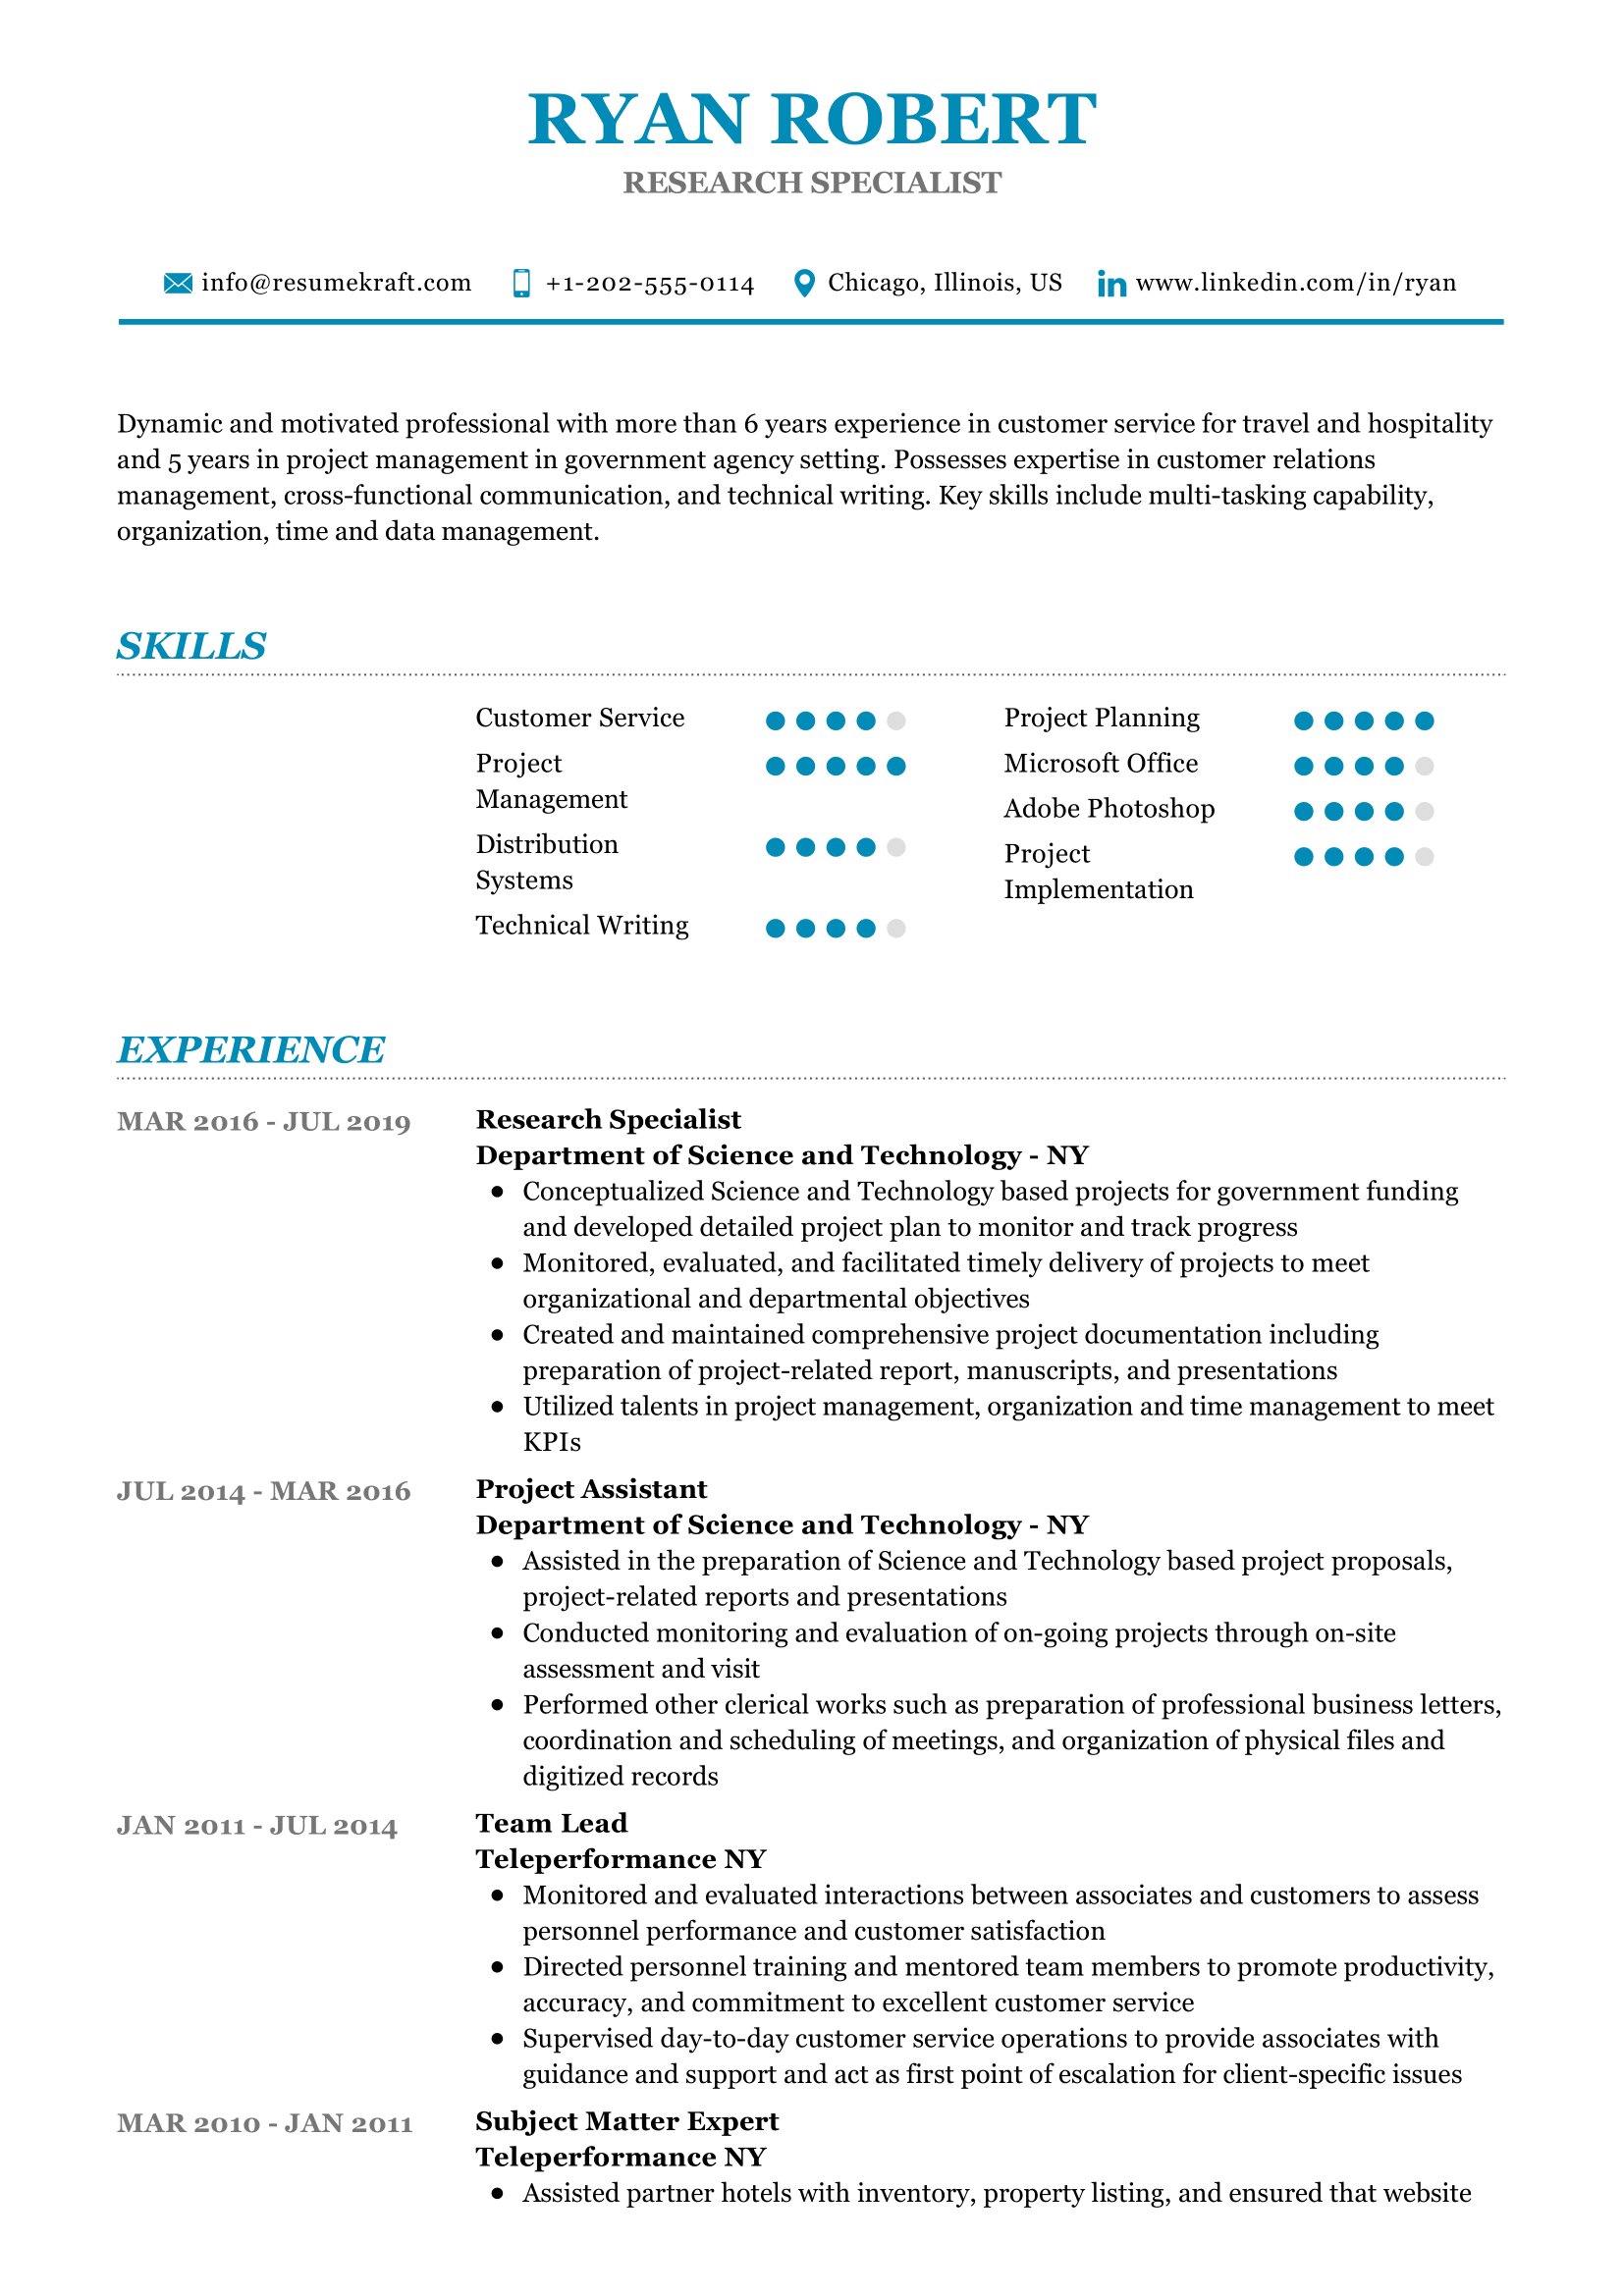 research job experience resume